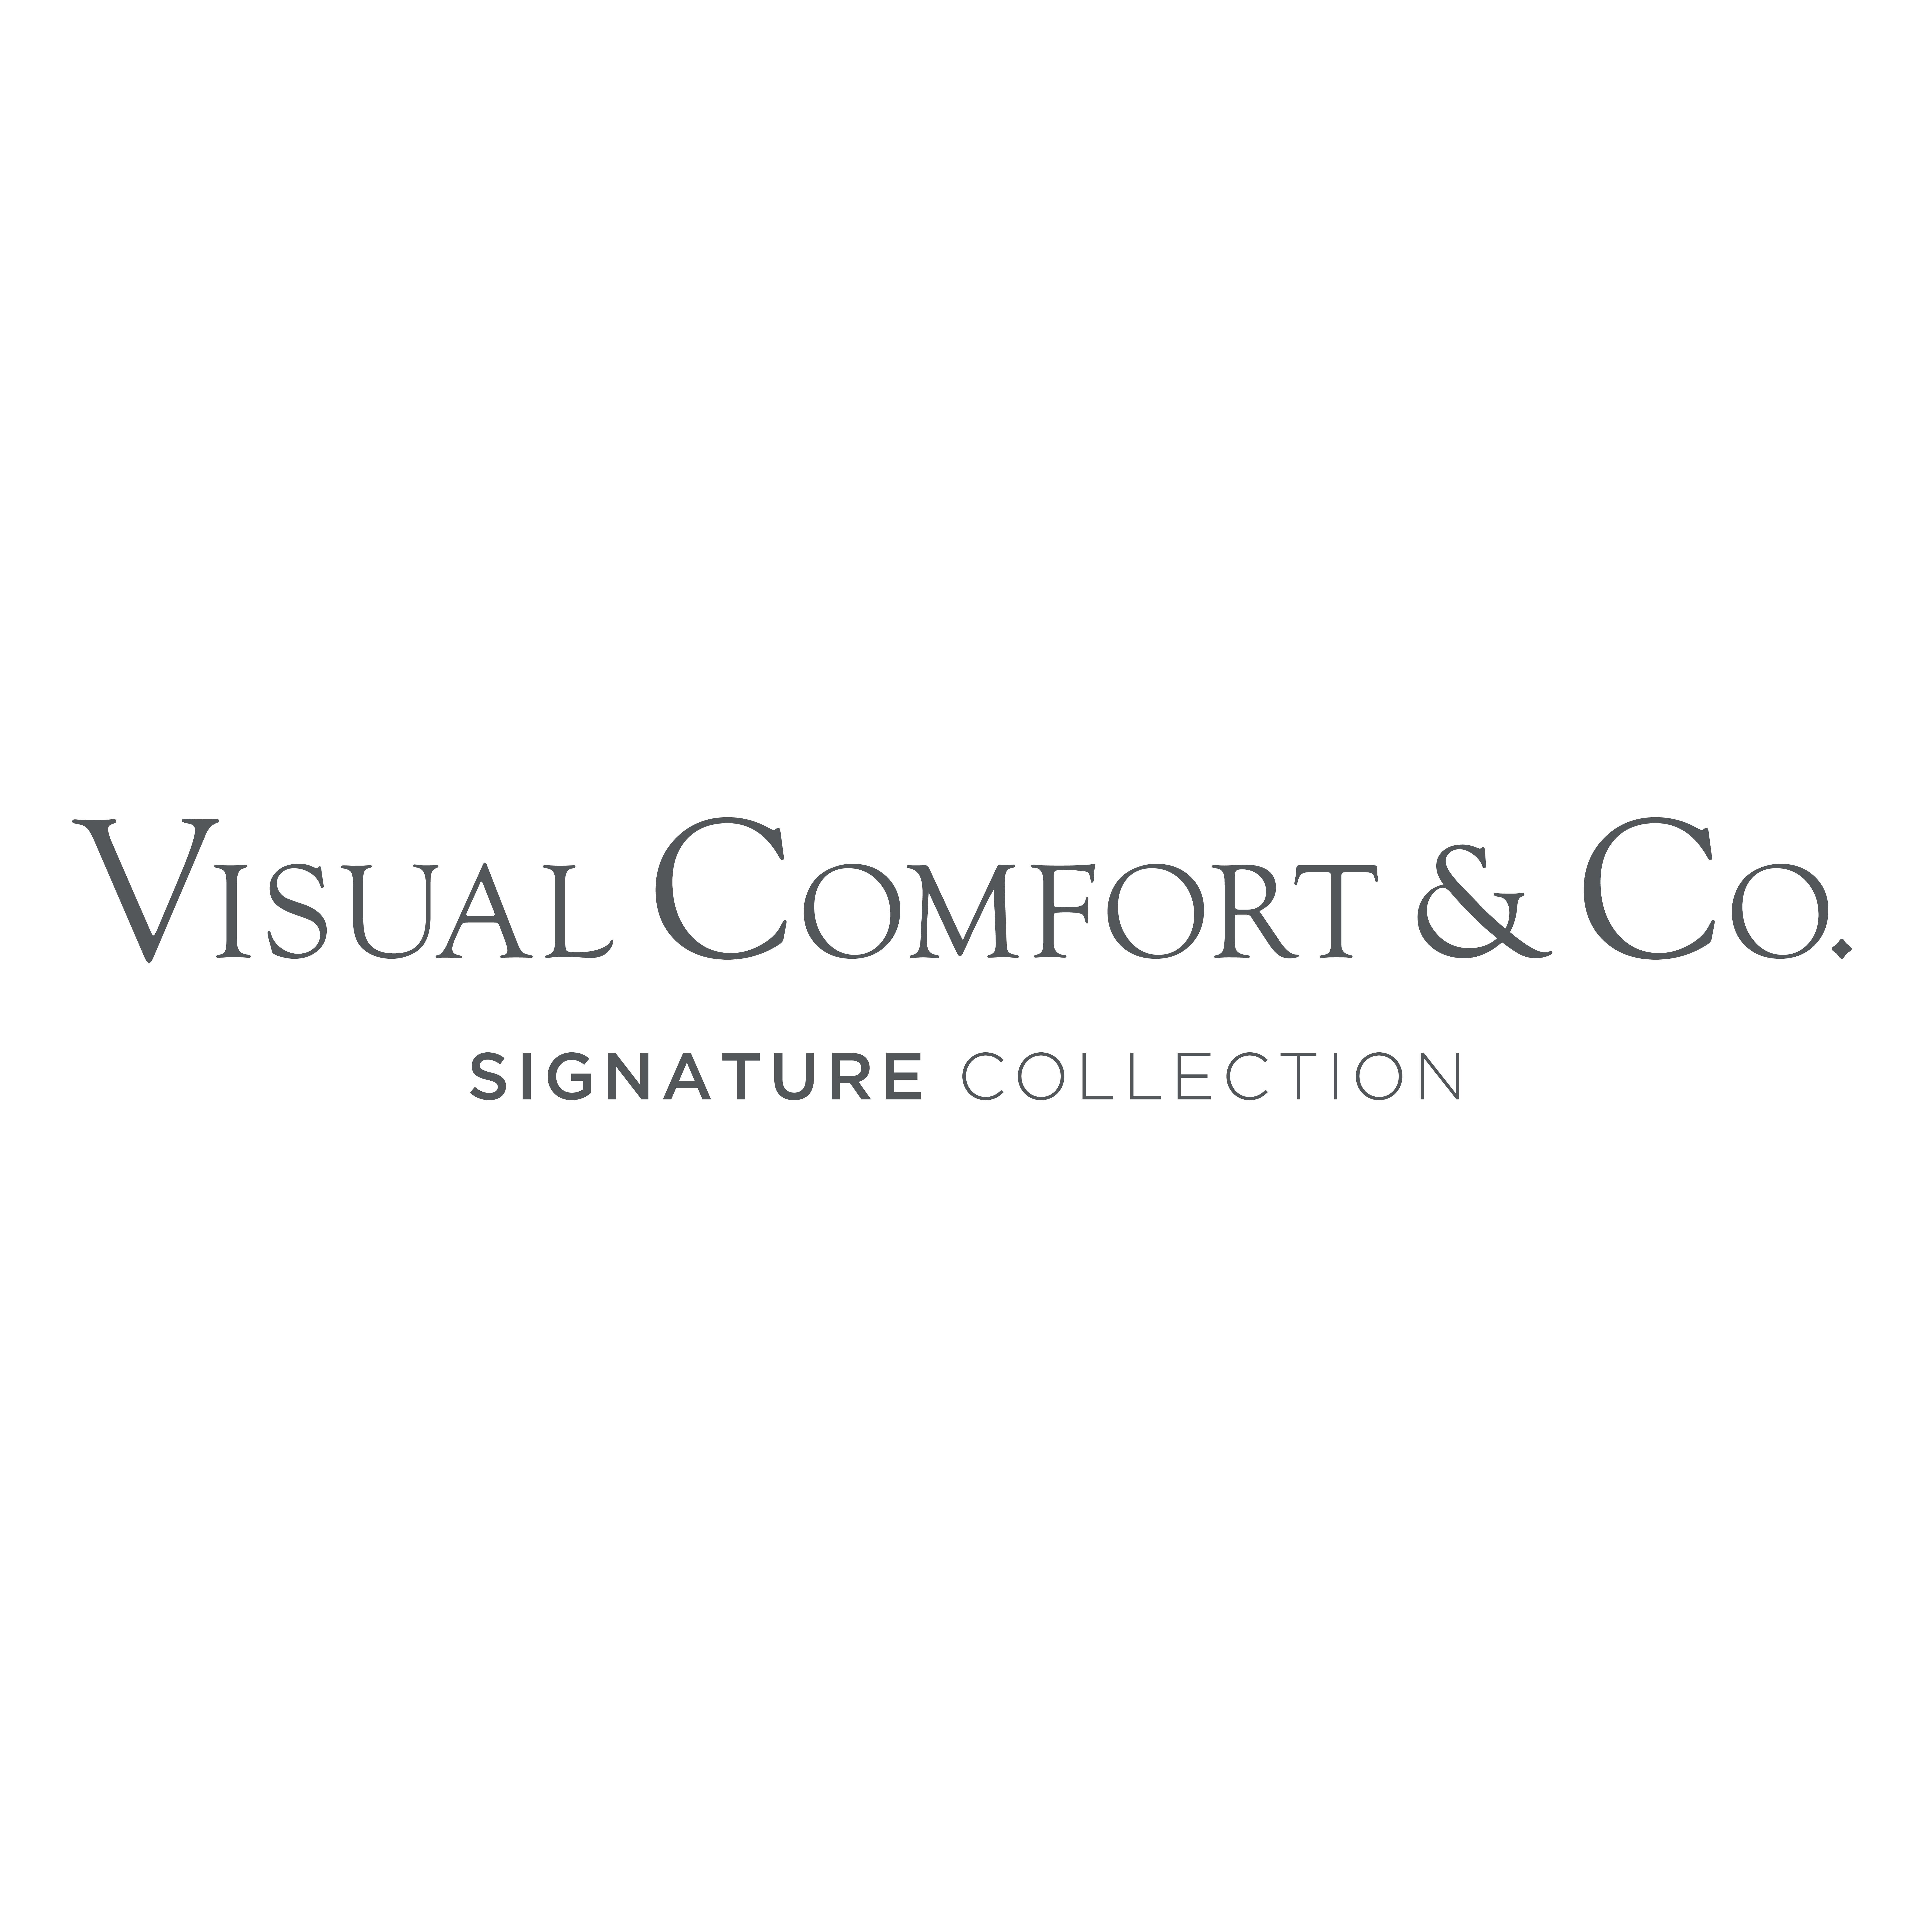 VISUAL COMFORT & CO. SIGNATURE COLLECTION RL in 